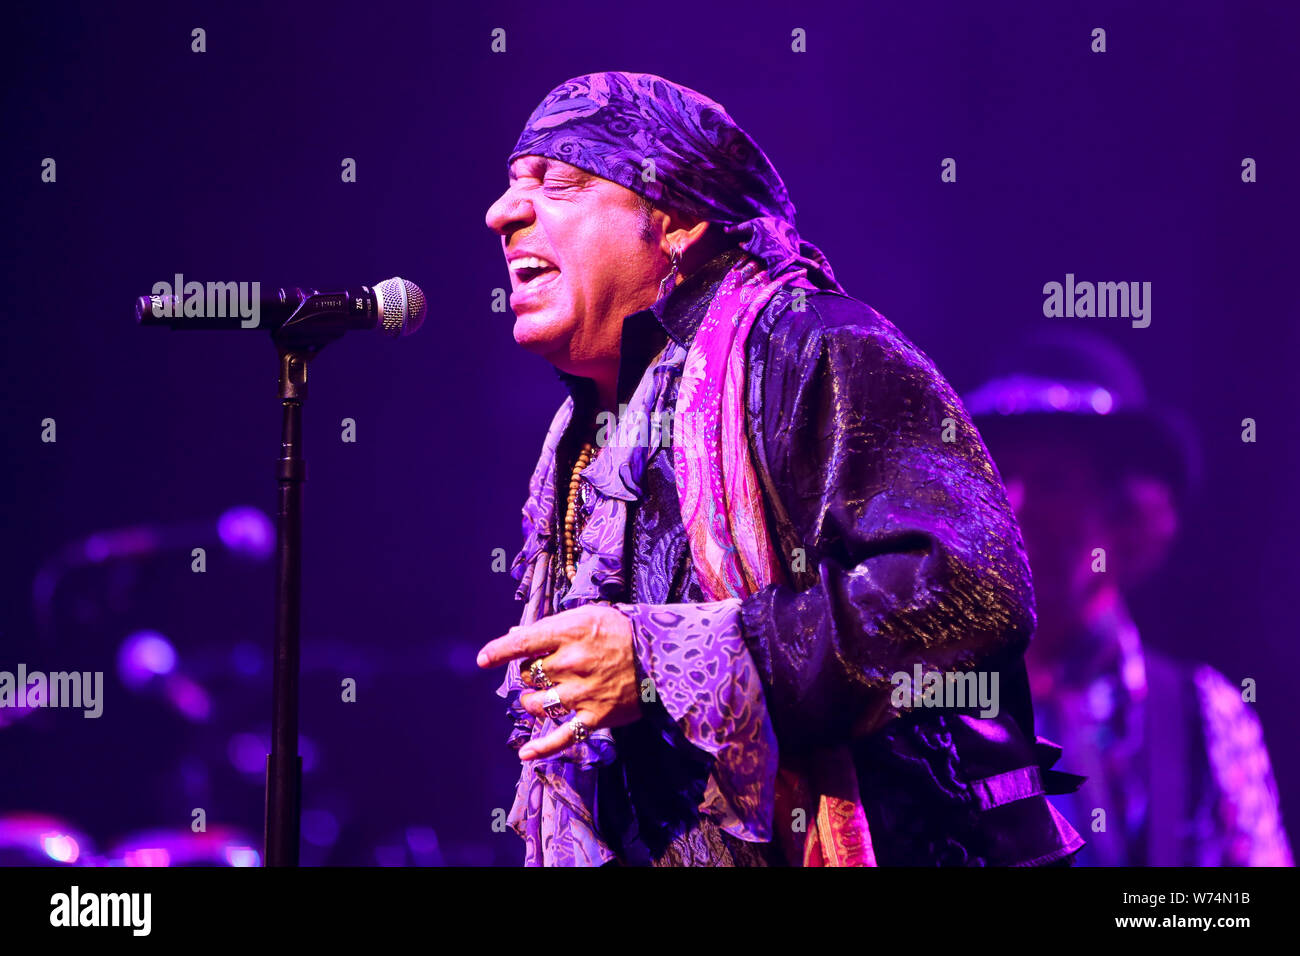 Huntington, United States. 18th July, 2019. Steven Van Zandt of Little Steven and the Disciples of Soul perform in concert on July 18, 2019 at the Paramount in Huntington New York. Credit: Debby Wong/Pacific Press/Alamy Live News Stock Photo